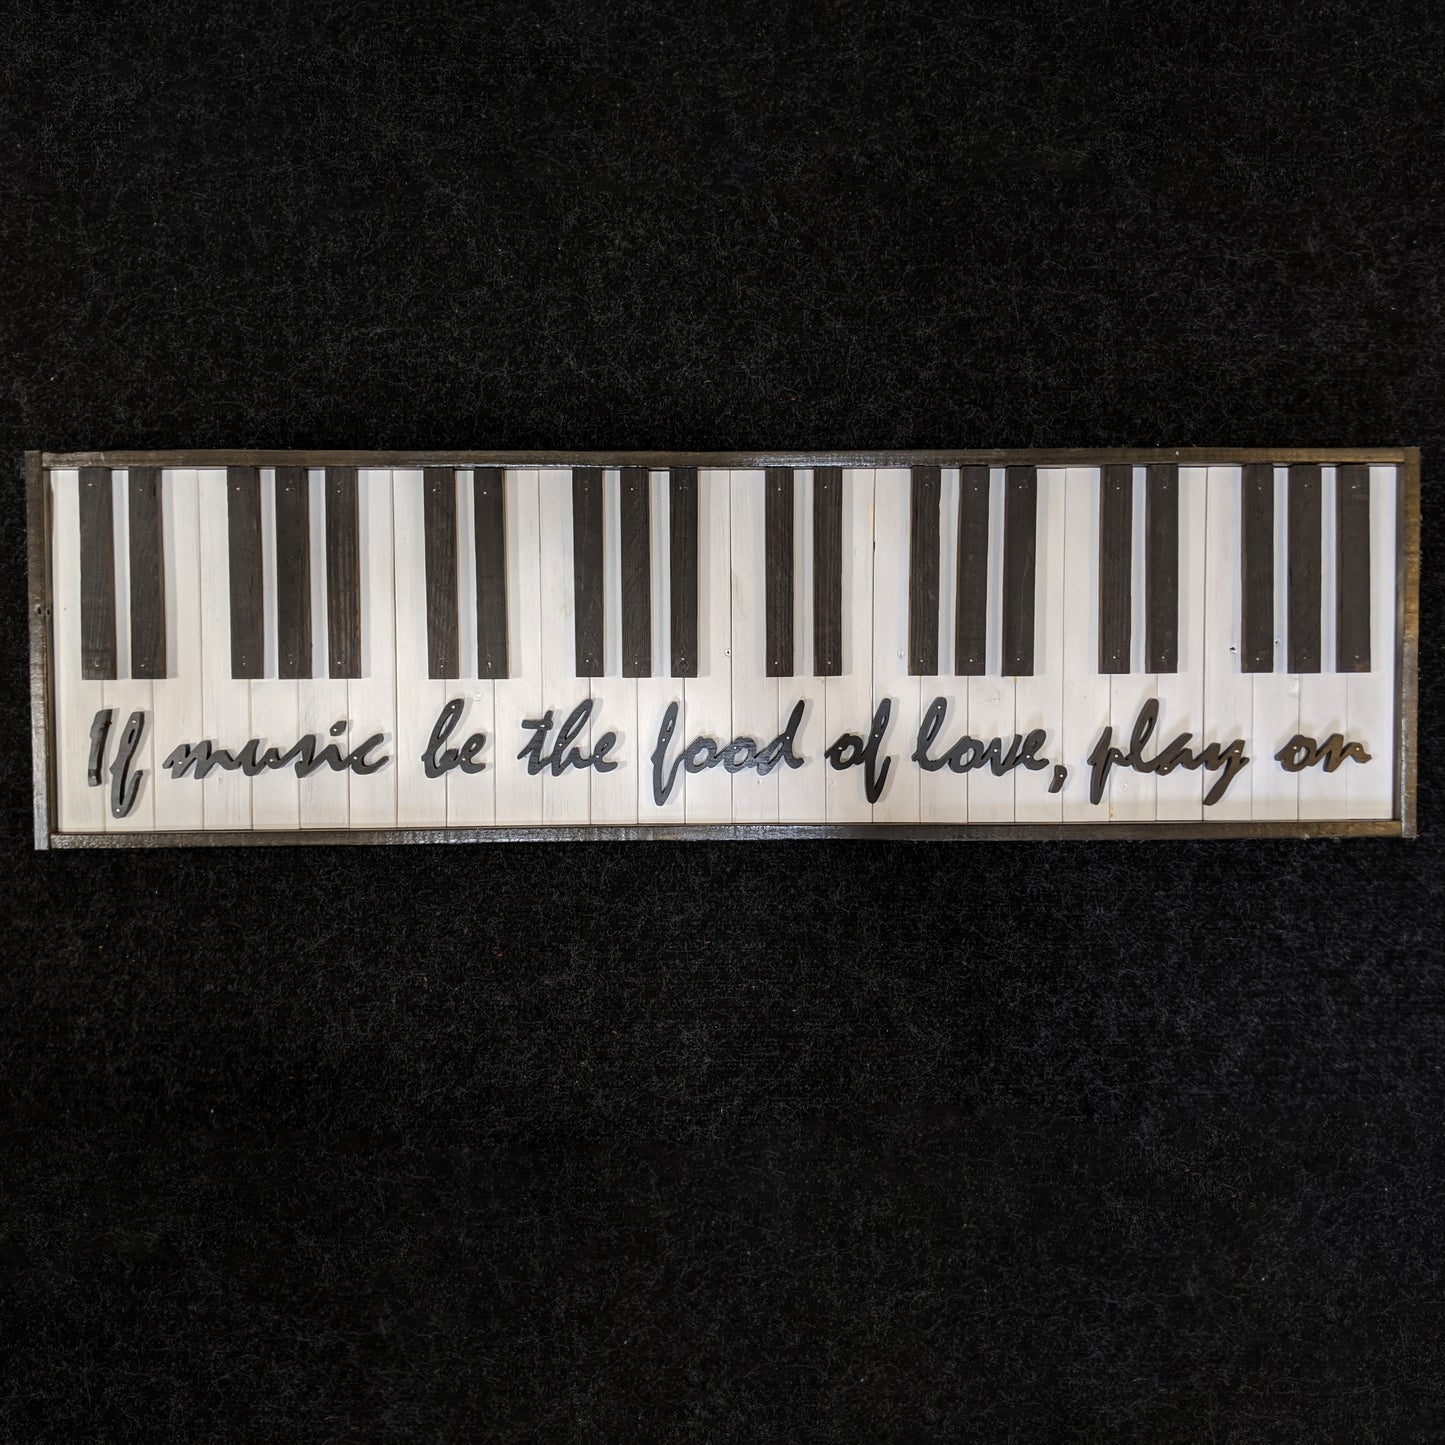 Reclaimed one-of-a-kind wooden piano artwork